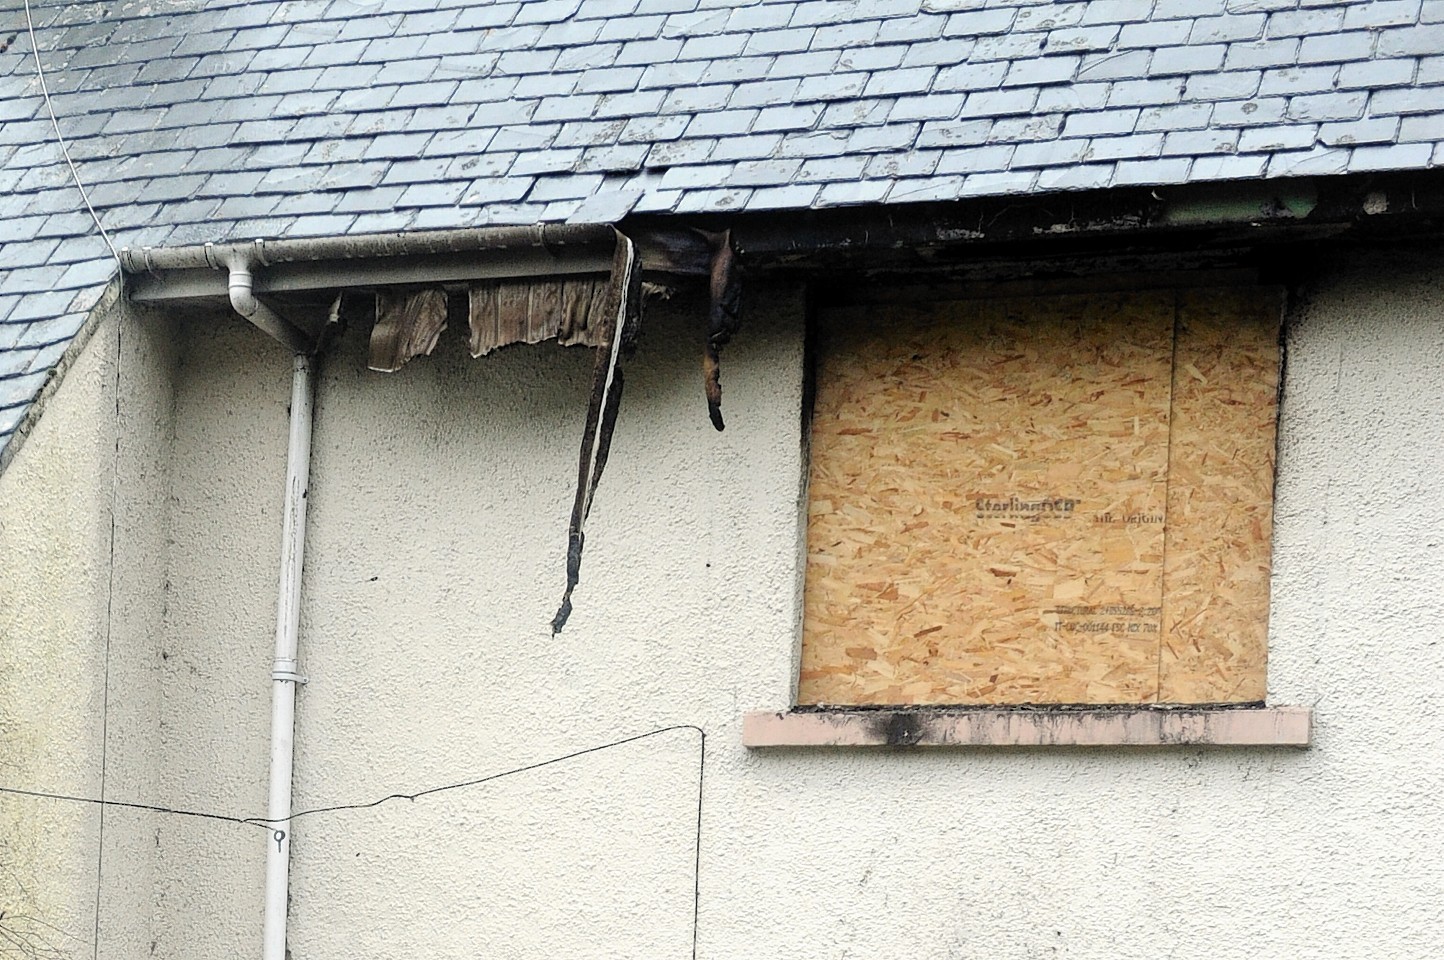 The boarded up exterior of the house in Lochend